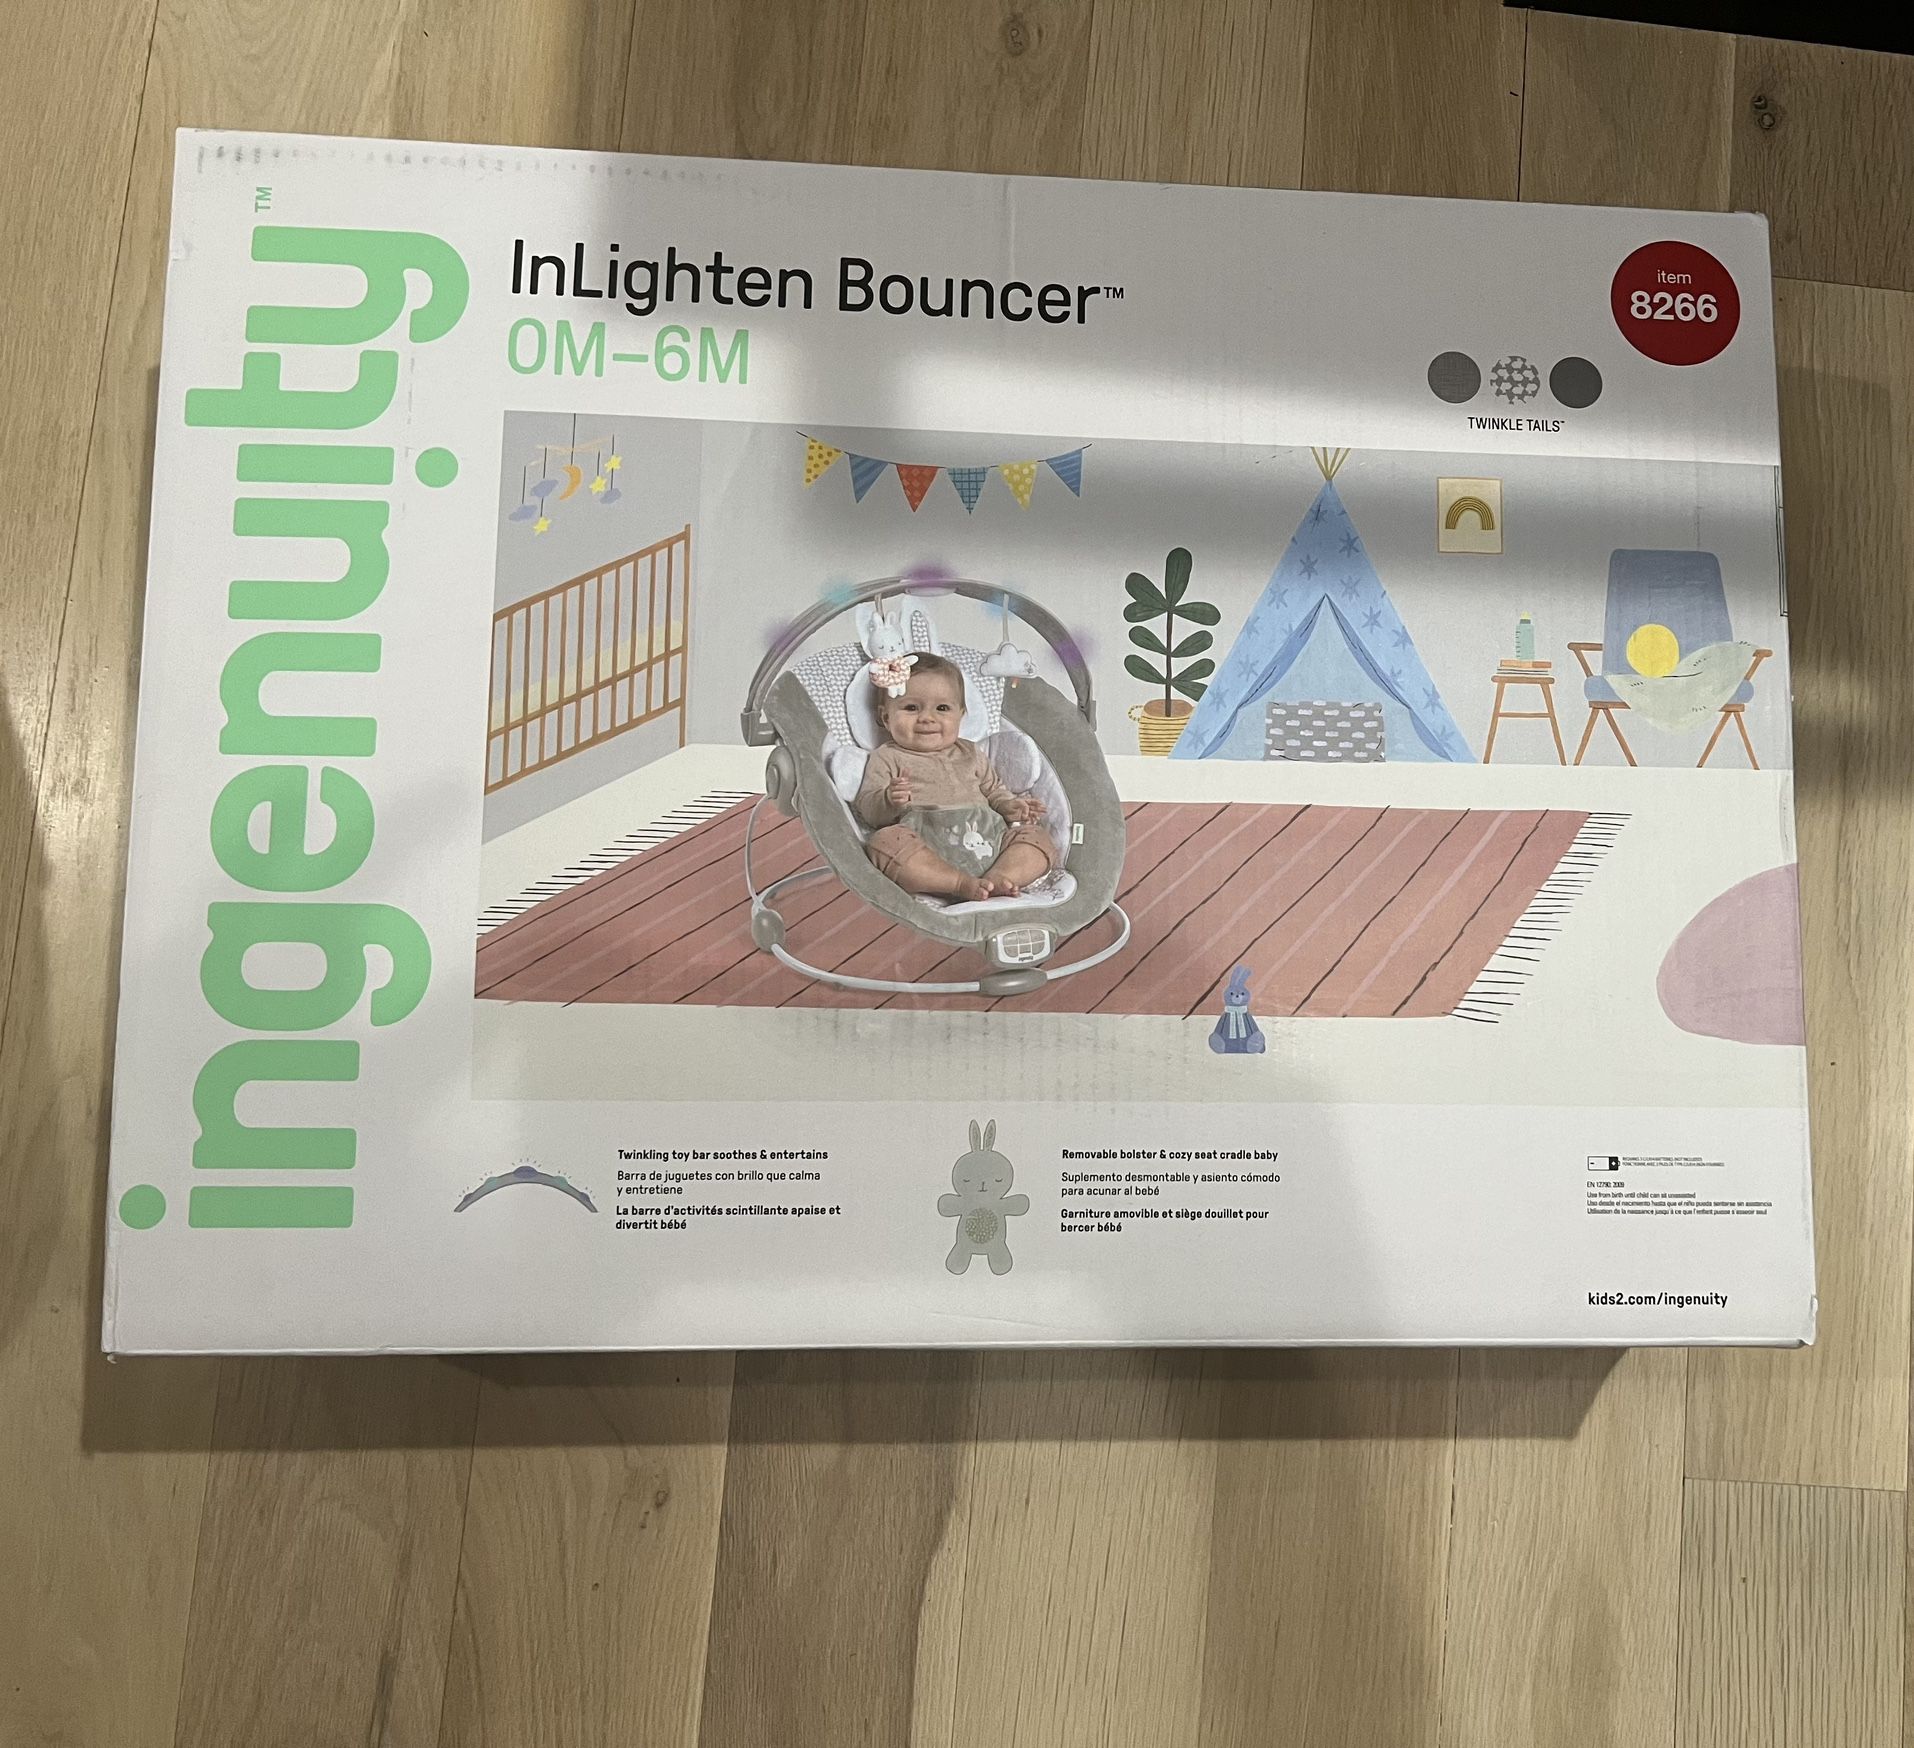 Baby Bouncer Infant Seat